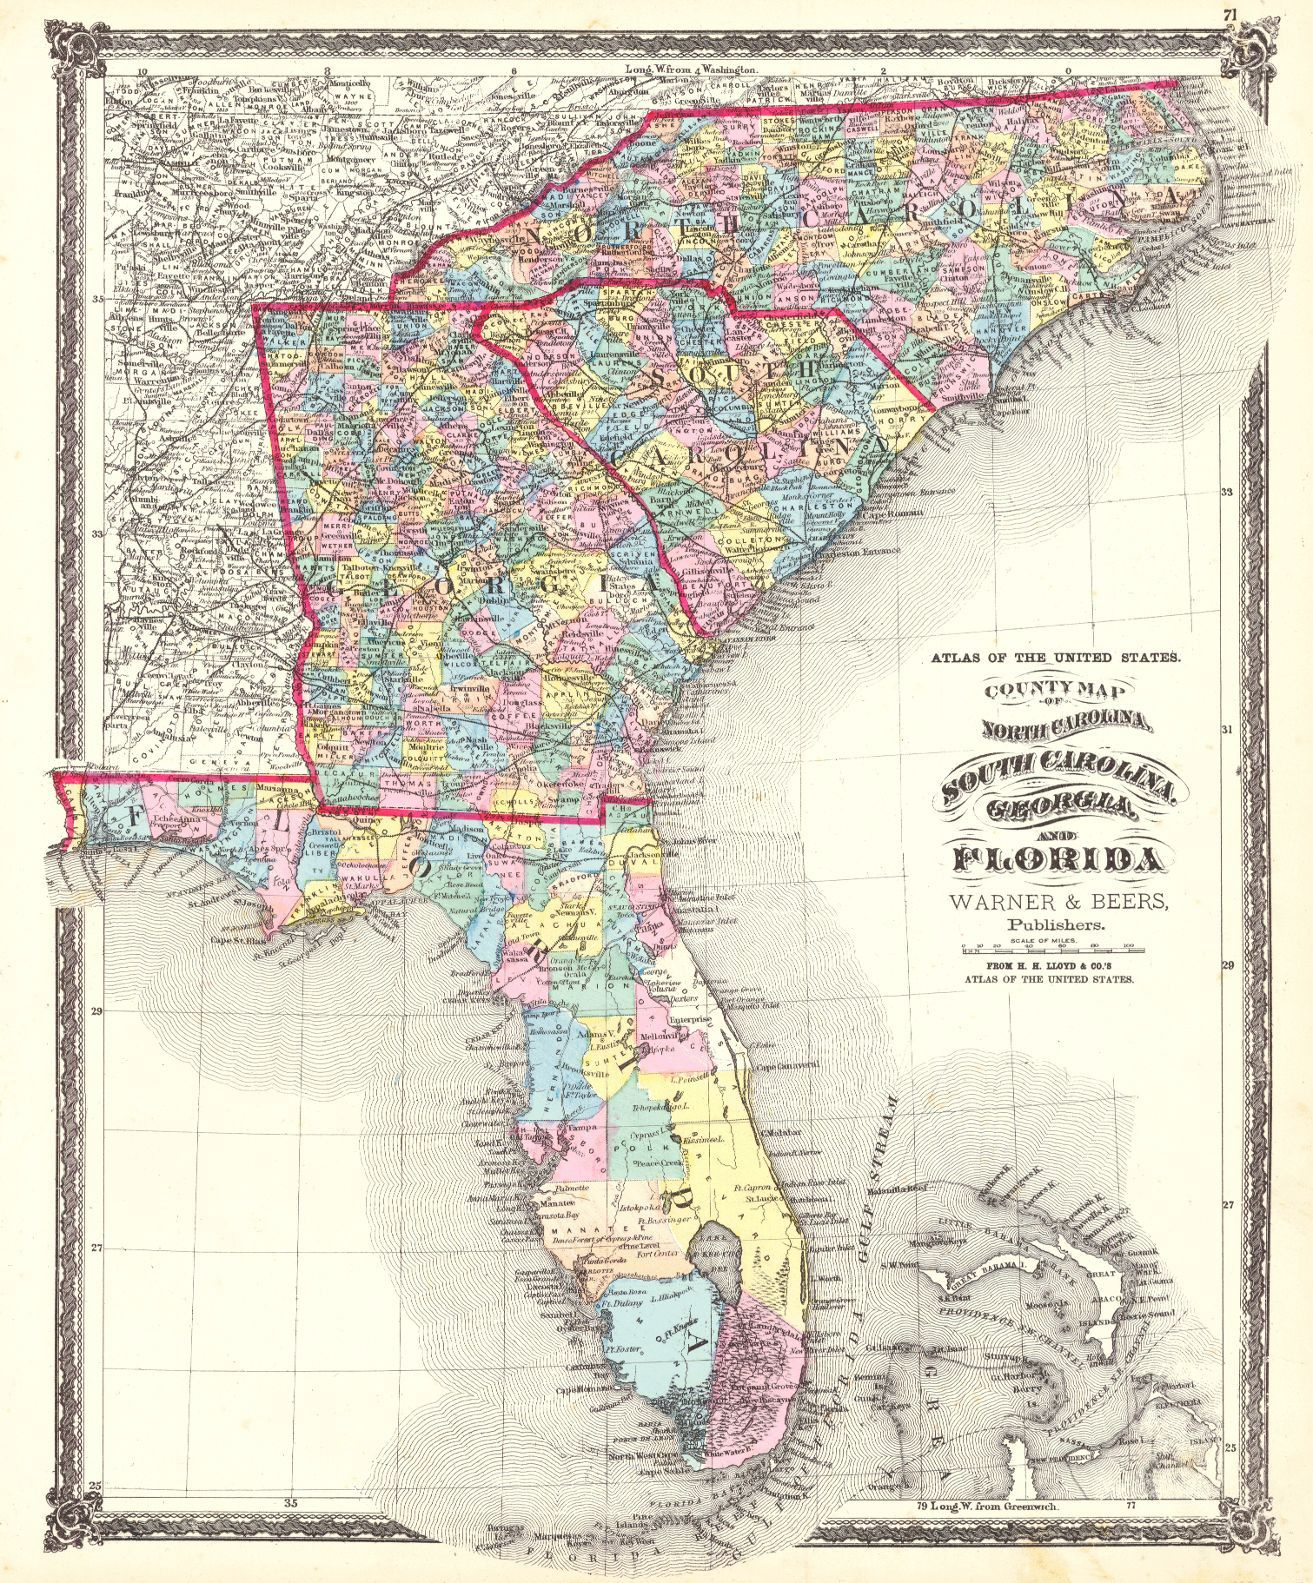 Atlas Of The United States County Map Of North Carolina South 